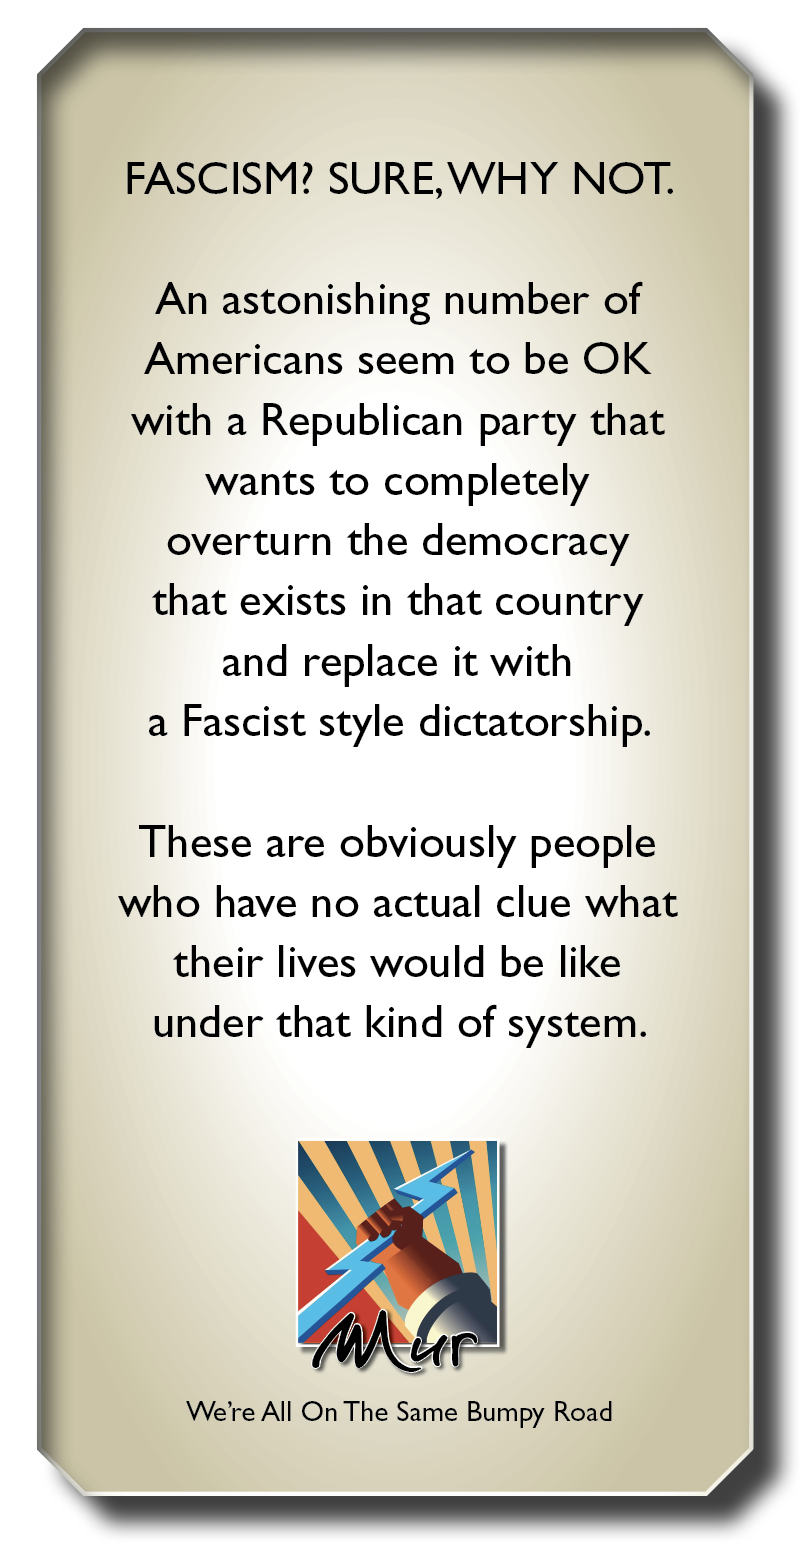 FASCISM? SURE,WHY NOT.

An astonishing number of
Americans seem to be OK
with a Republican party that
wants to completely
overturn the democracy
that exists in that country
and replace it with
a Fascist style dictatorship.

These are obviously people
who have no actual clue what

their lives would be like
under that kind of system.

b 4

We're All On The Same Bumpy Road